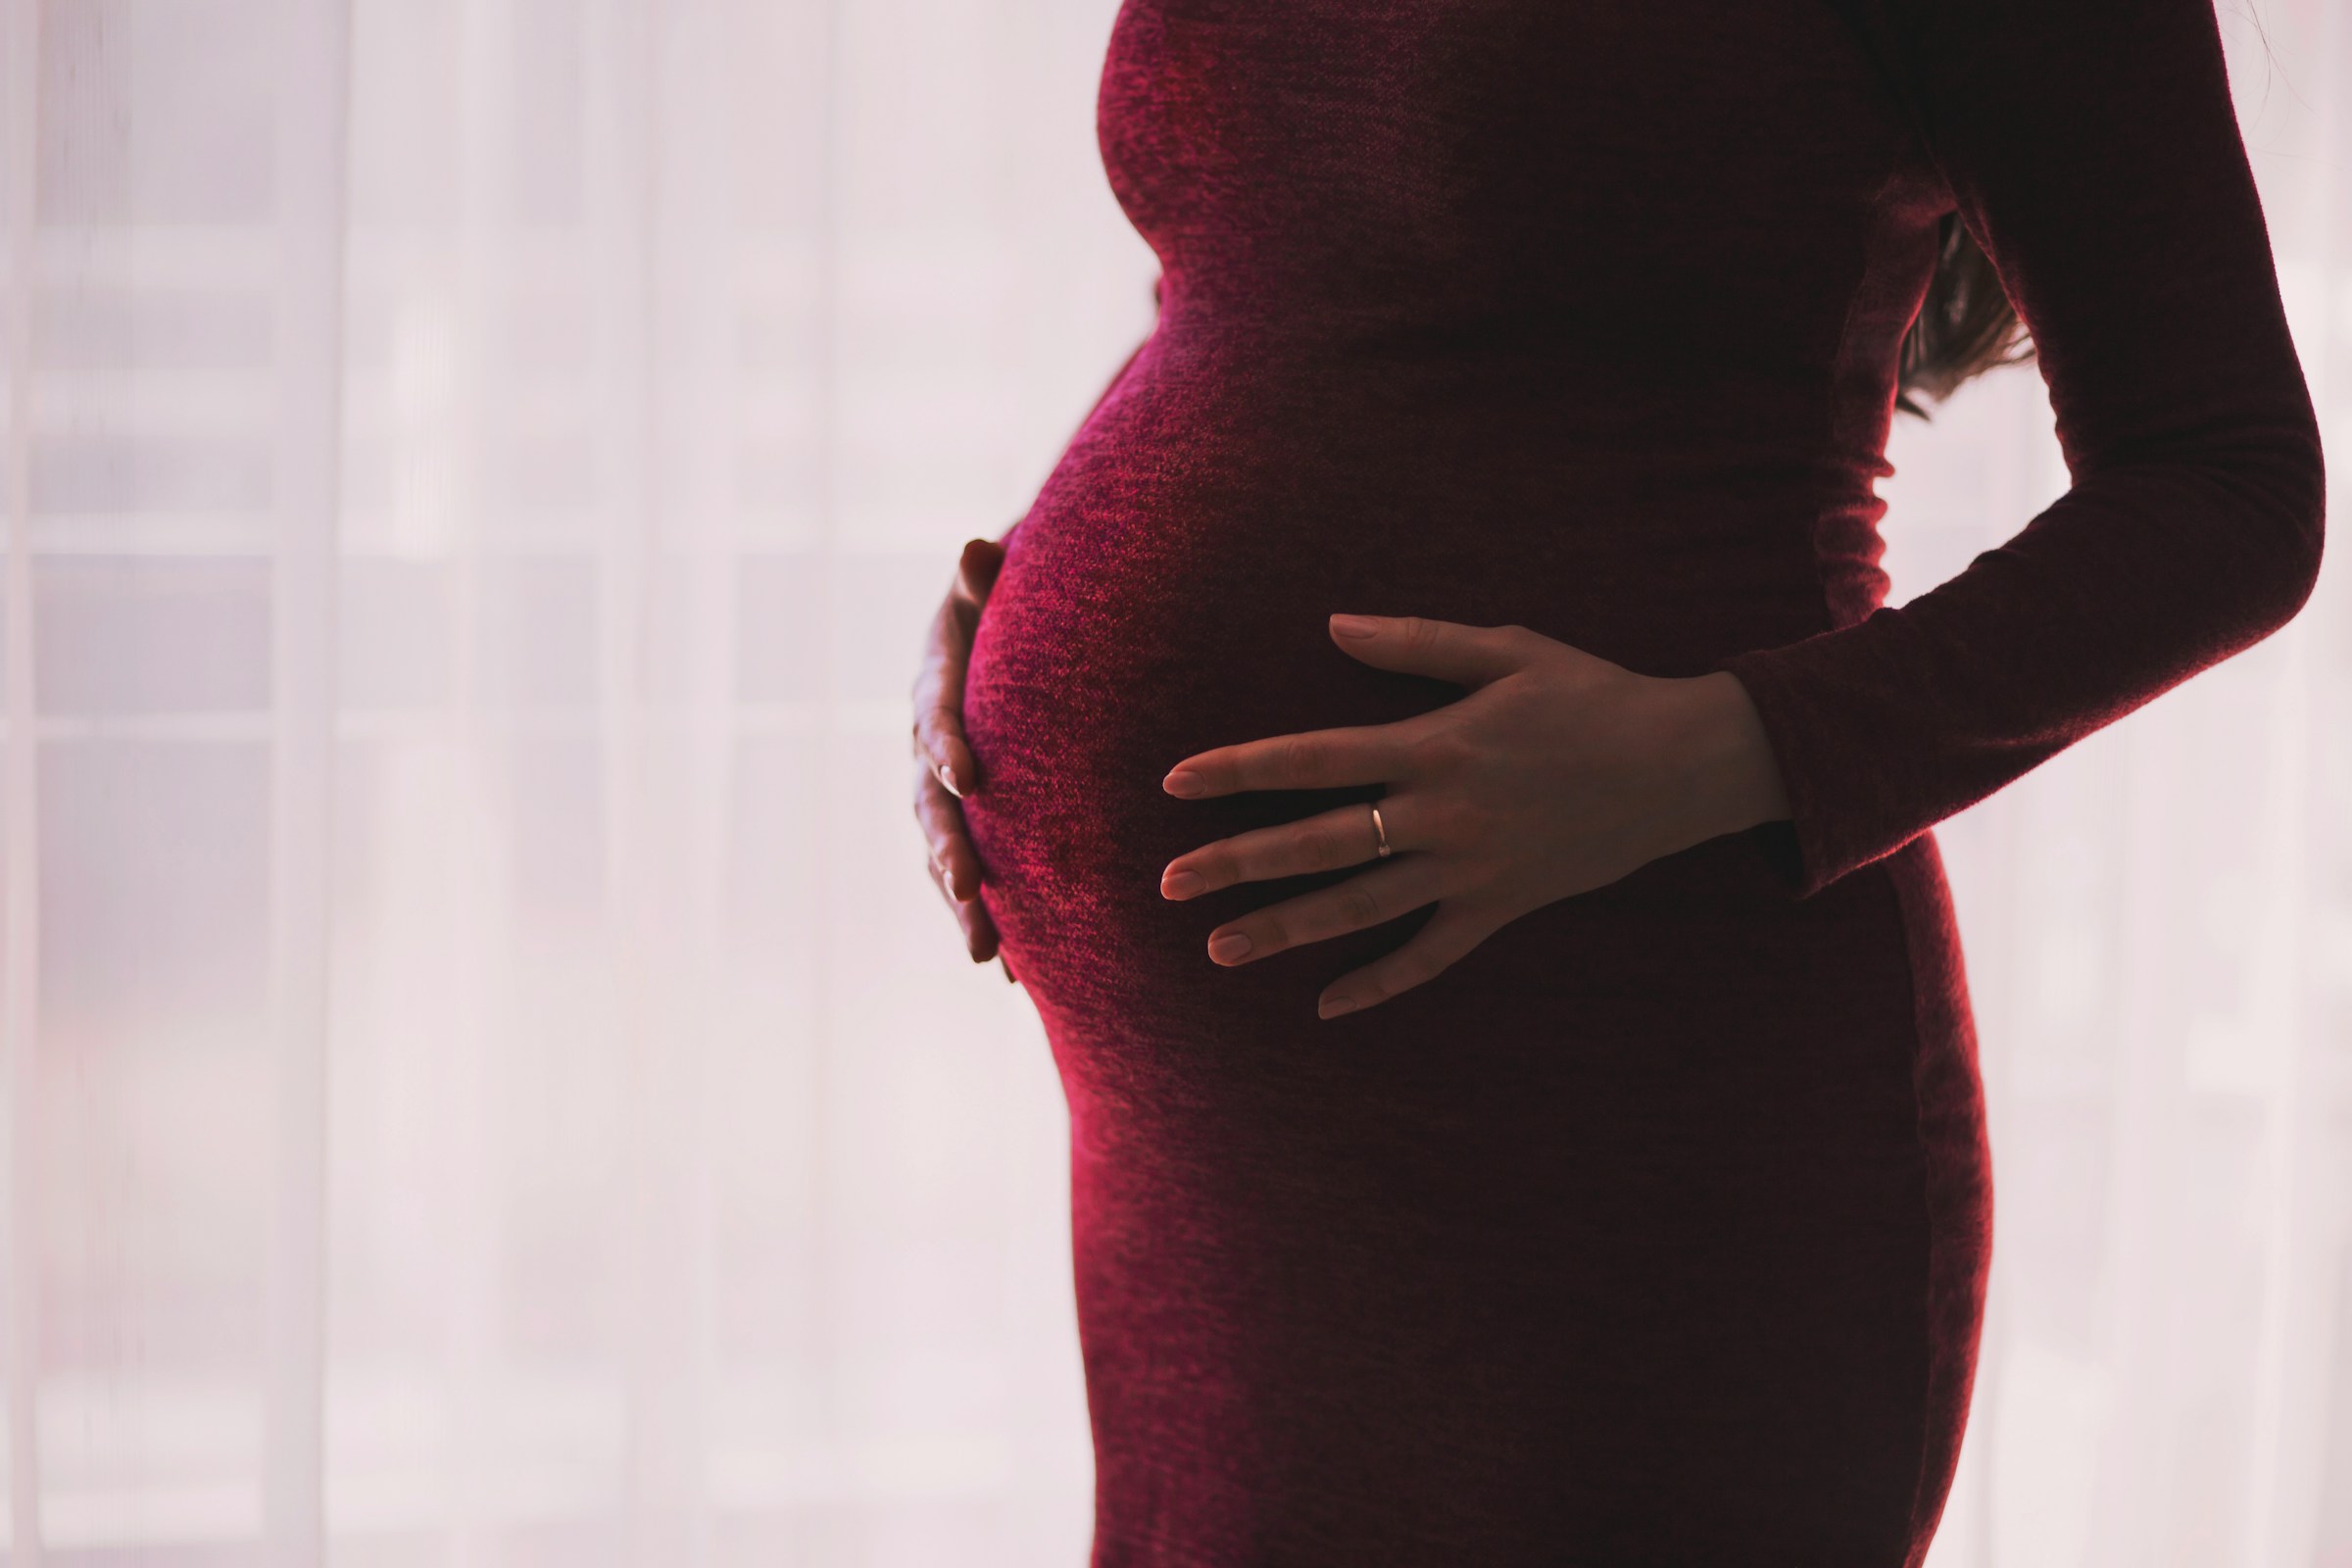 A pregnant woman wearing red | Source: Unsplash